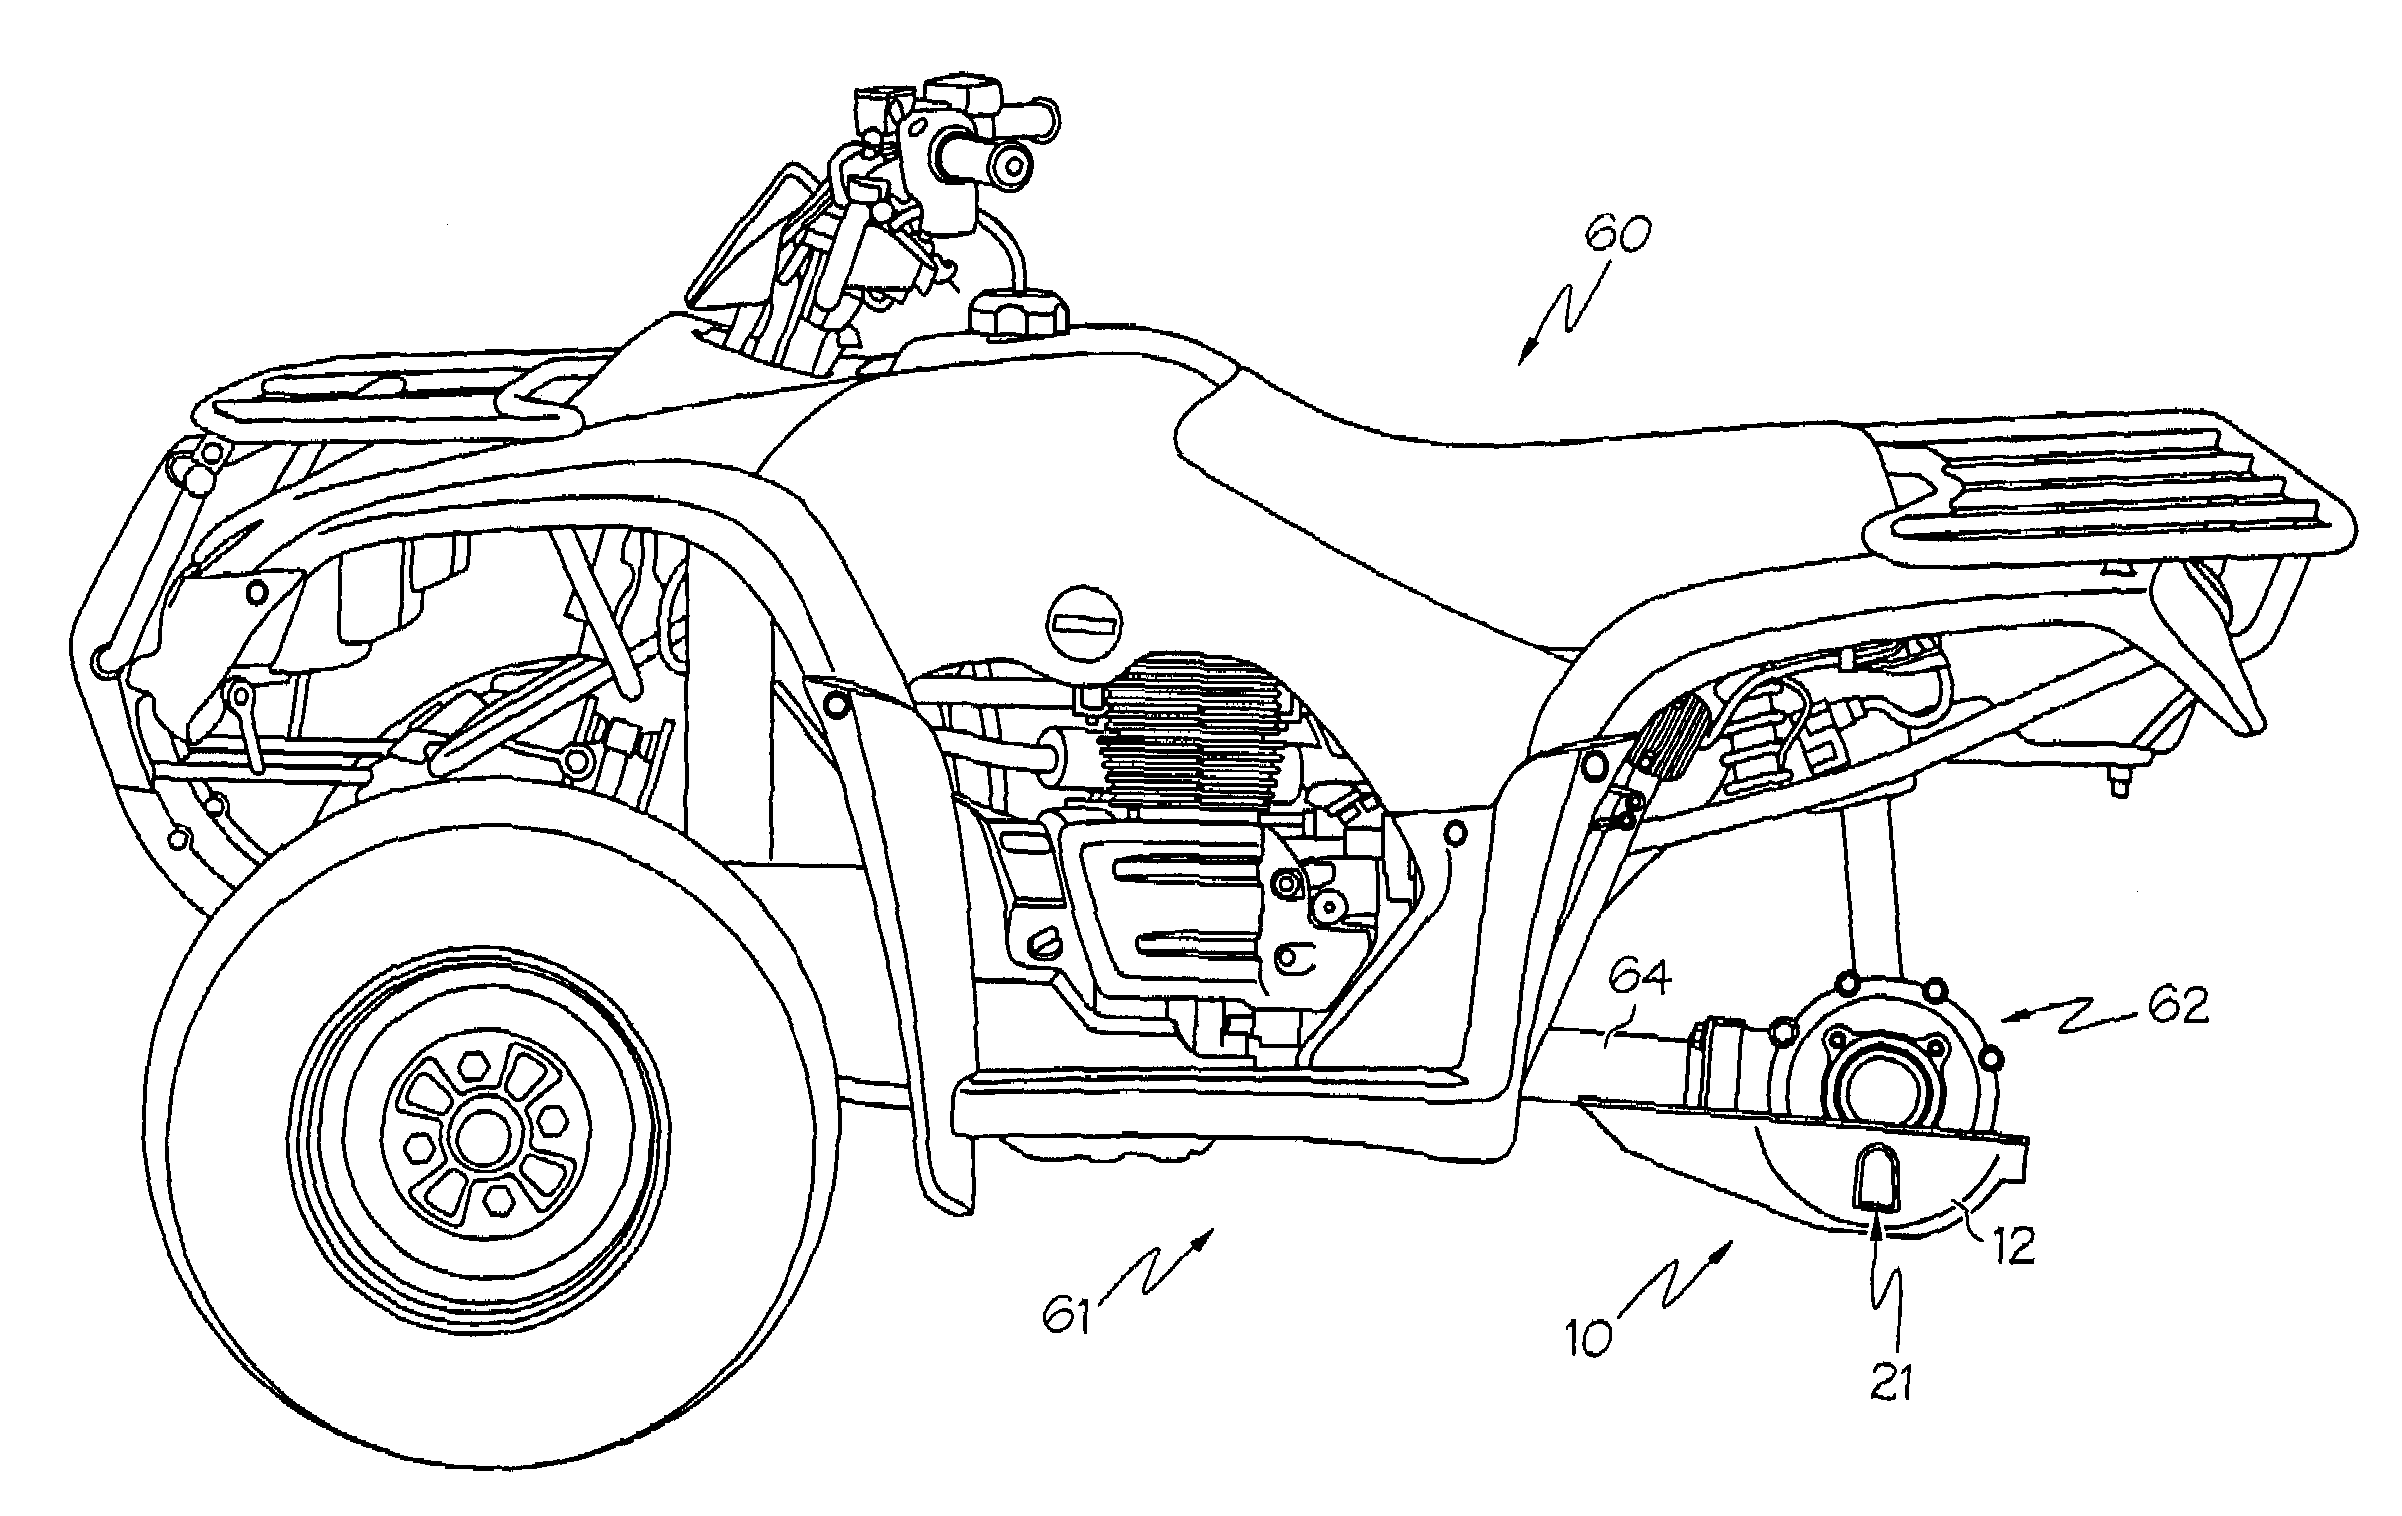 Protective cover for the underside of a vehicle